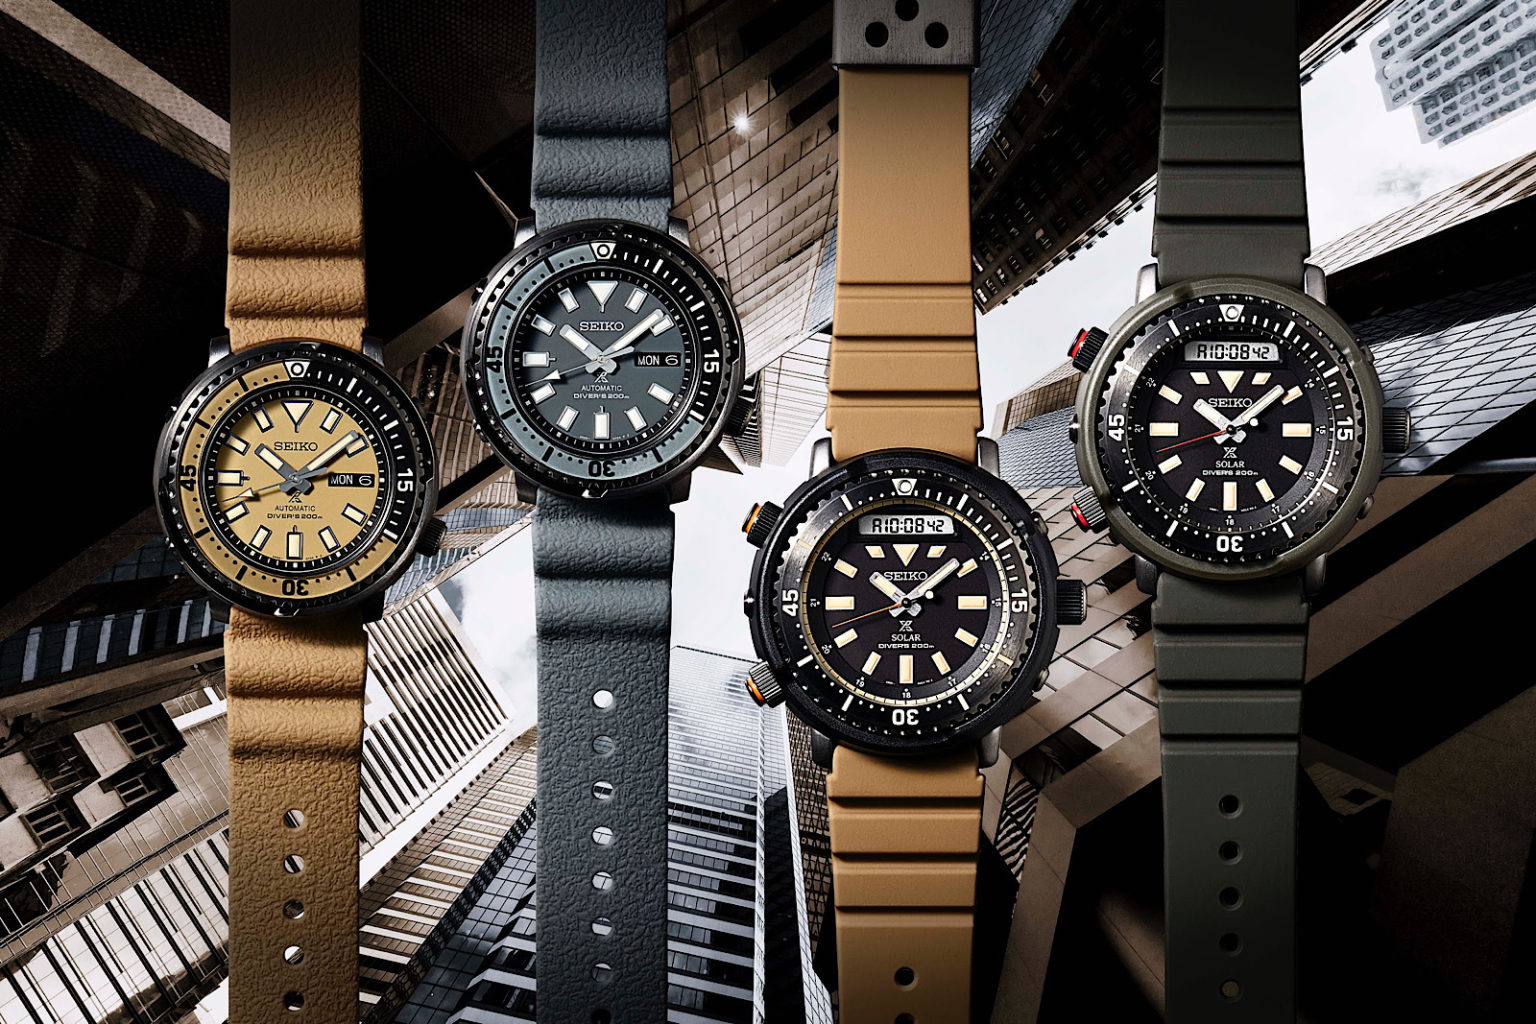 SJX Watches on Twitter: "Seiko's affordable "Tuna" inspired watches get new, monochromatic with new automatics as well as "Arnie" analogue-digitals. More details on SJX Watches: https://t.co/ubBFY3gRfP #seiko #seikotuna